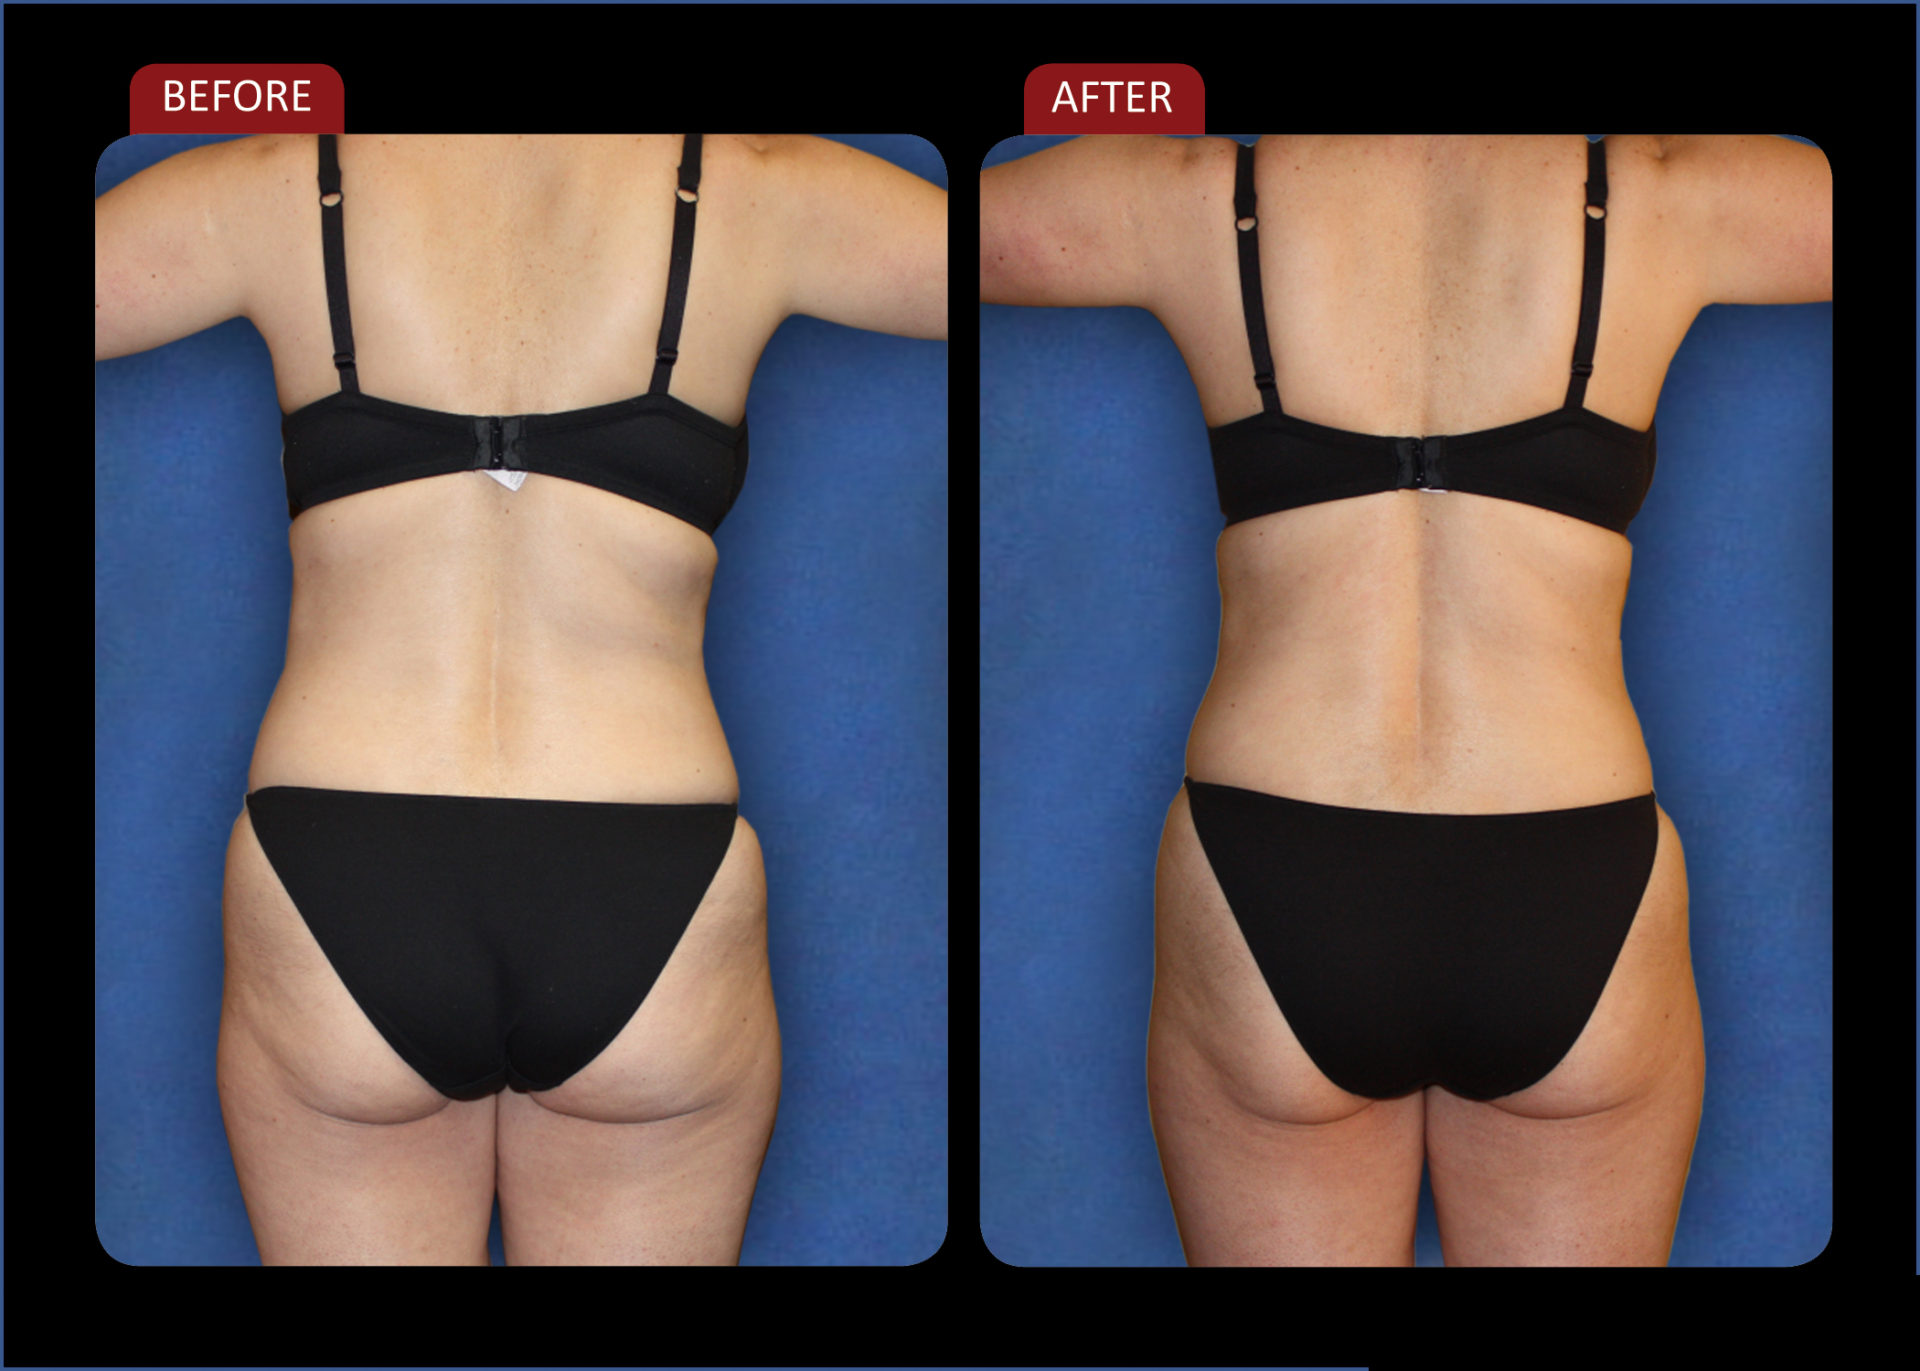 Before and after photo weight loss treatment woman back view